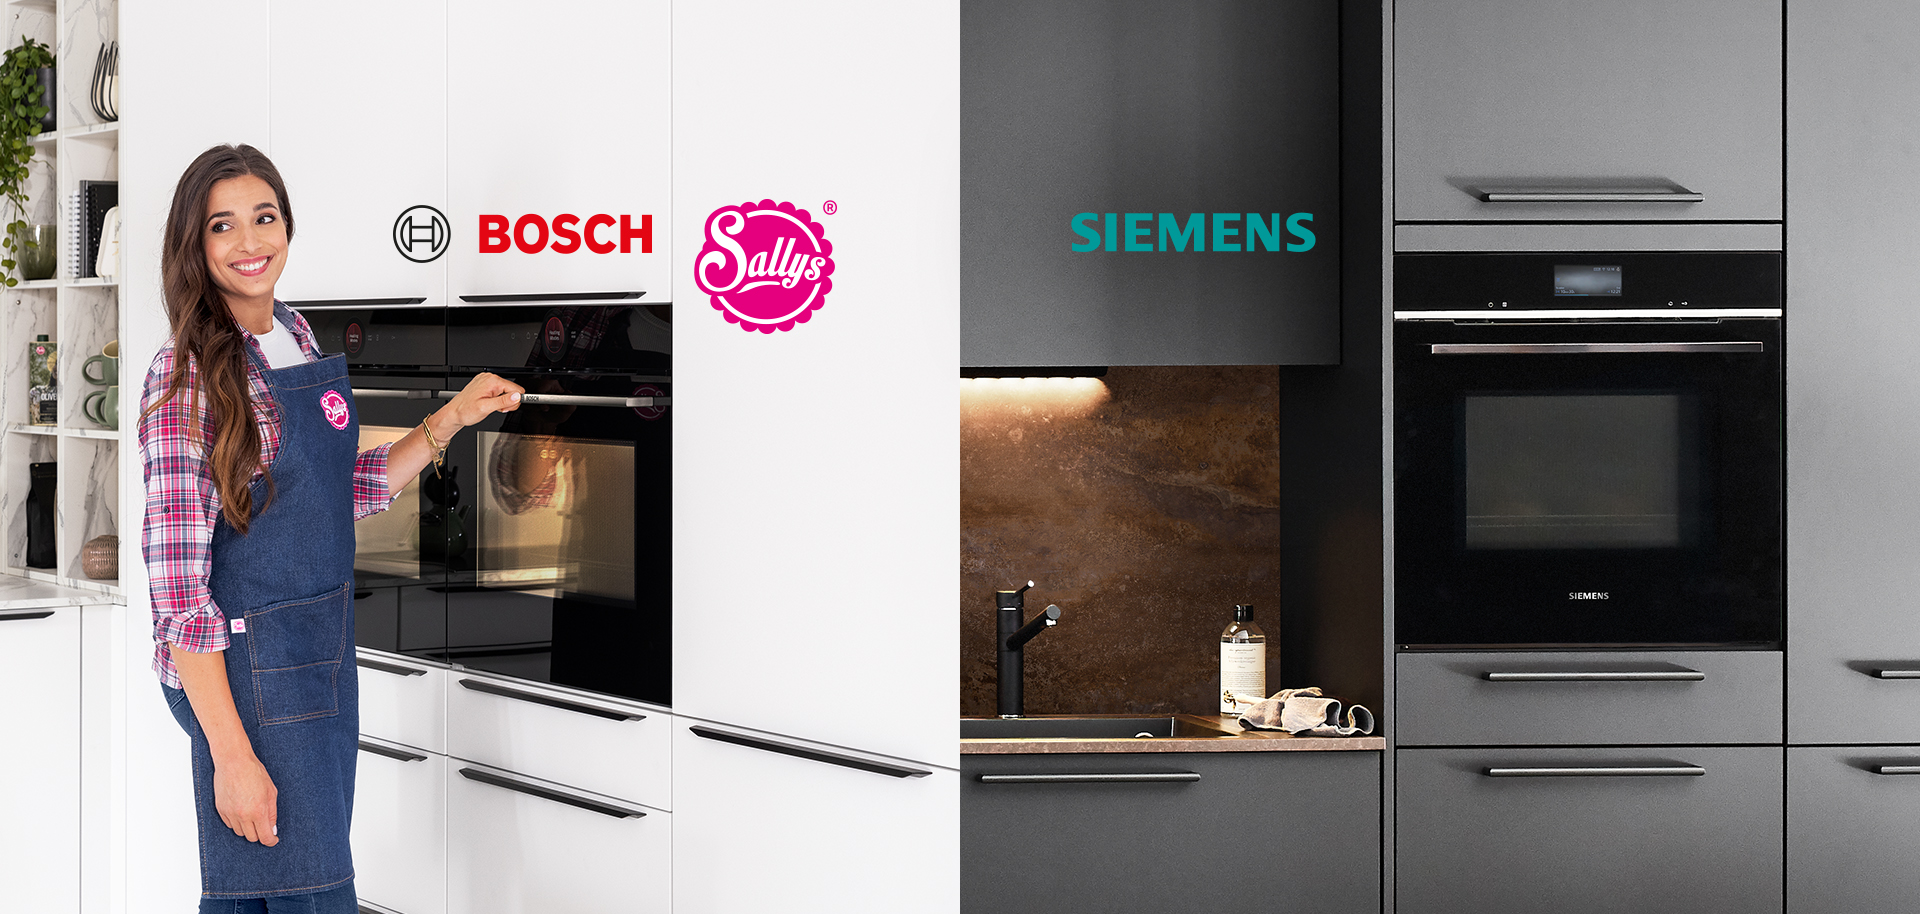 A smiling person wearing an apron presents a Bosch oven, while on the opposite side, a modern Siemens kitchen with sleek appliances is showcased.